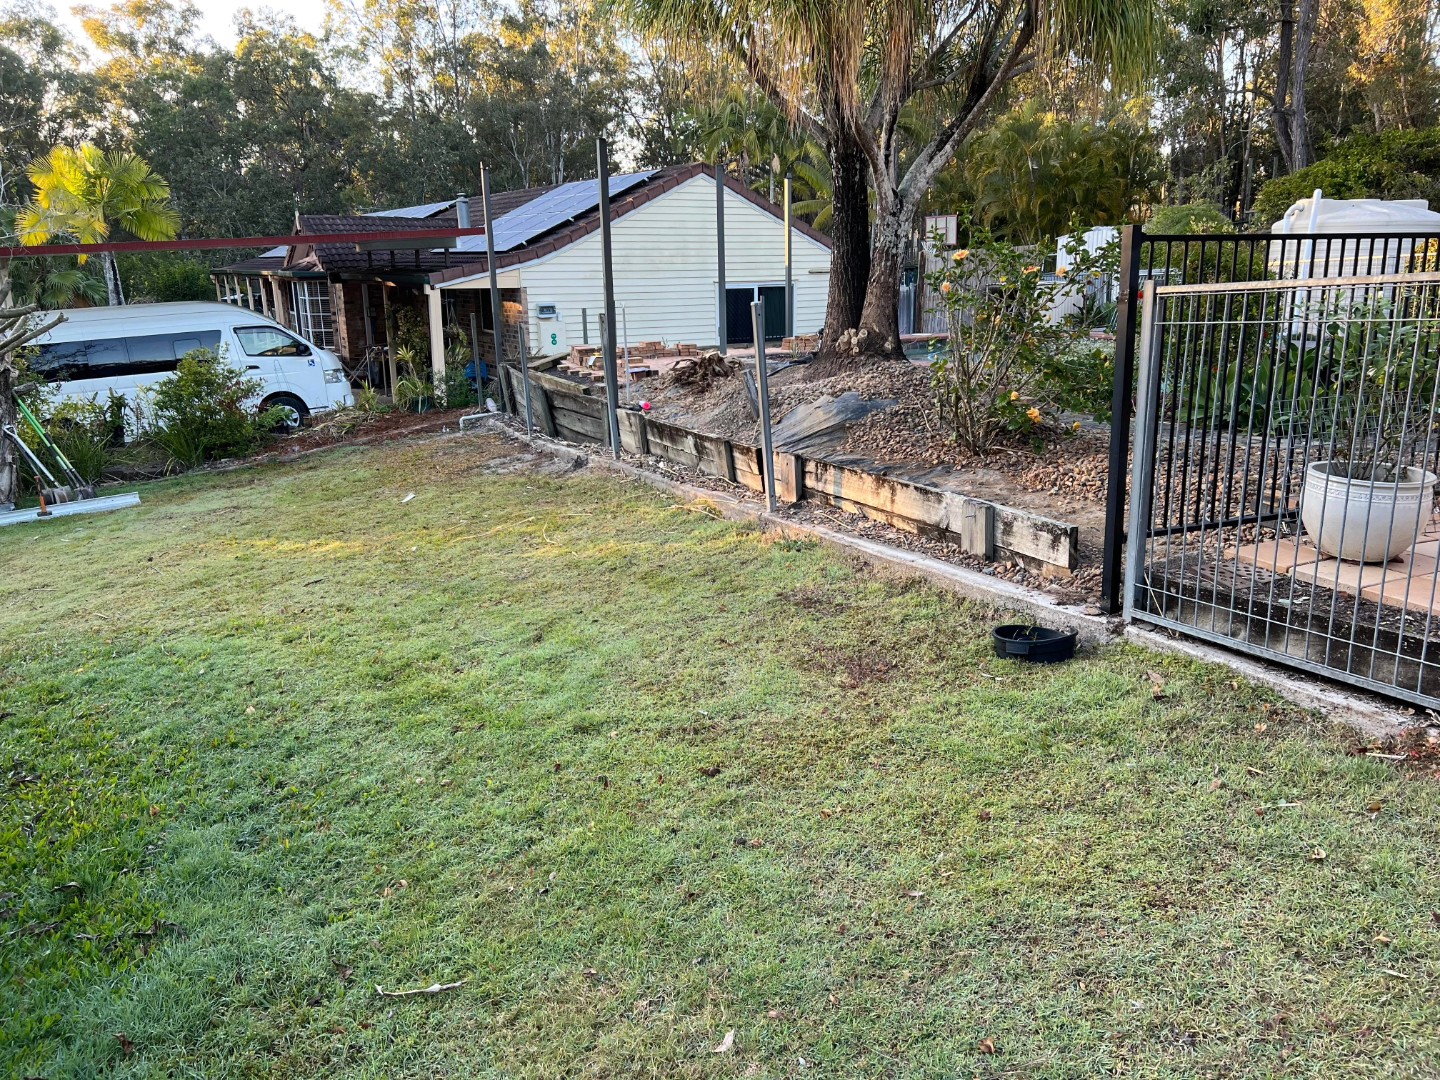 Timber, a traditional choice for retaining walls, has its charm. It blends seamlessly with the natural surroundings, adding a rustic touch to the landscape. However, timber is not without its drawbacks. It is susceptible to decay, insects, termites, and weather effects. In Brisbane’s climate, these factors can accelerate the deterioration of timber walls.